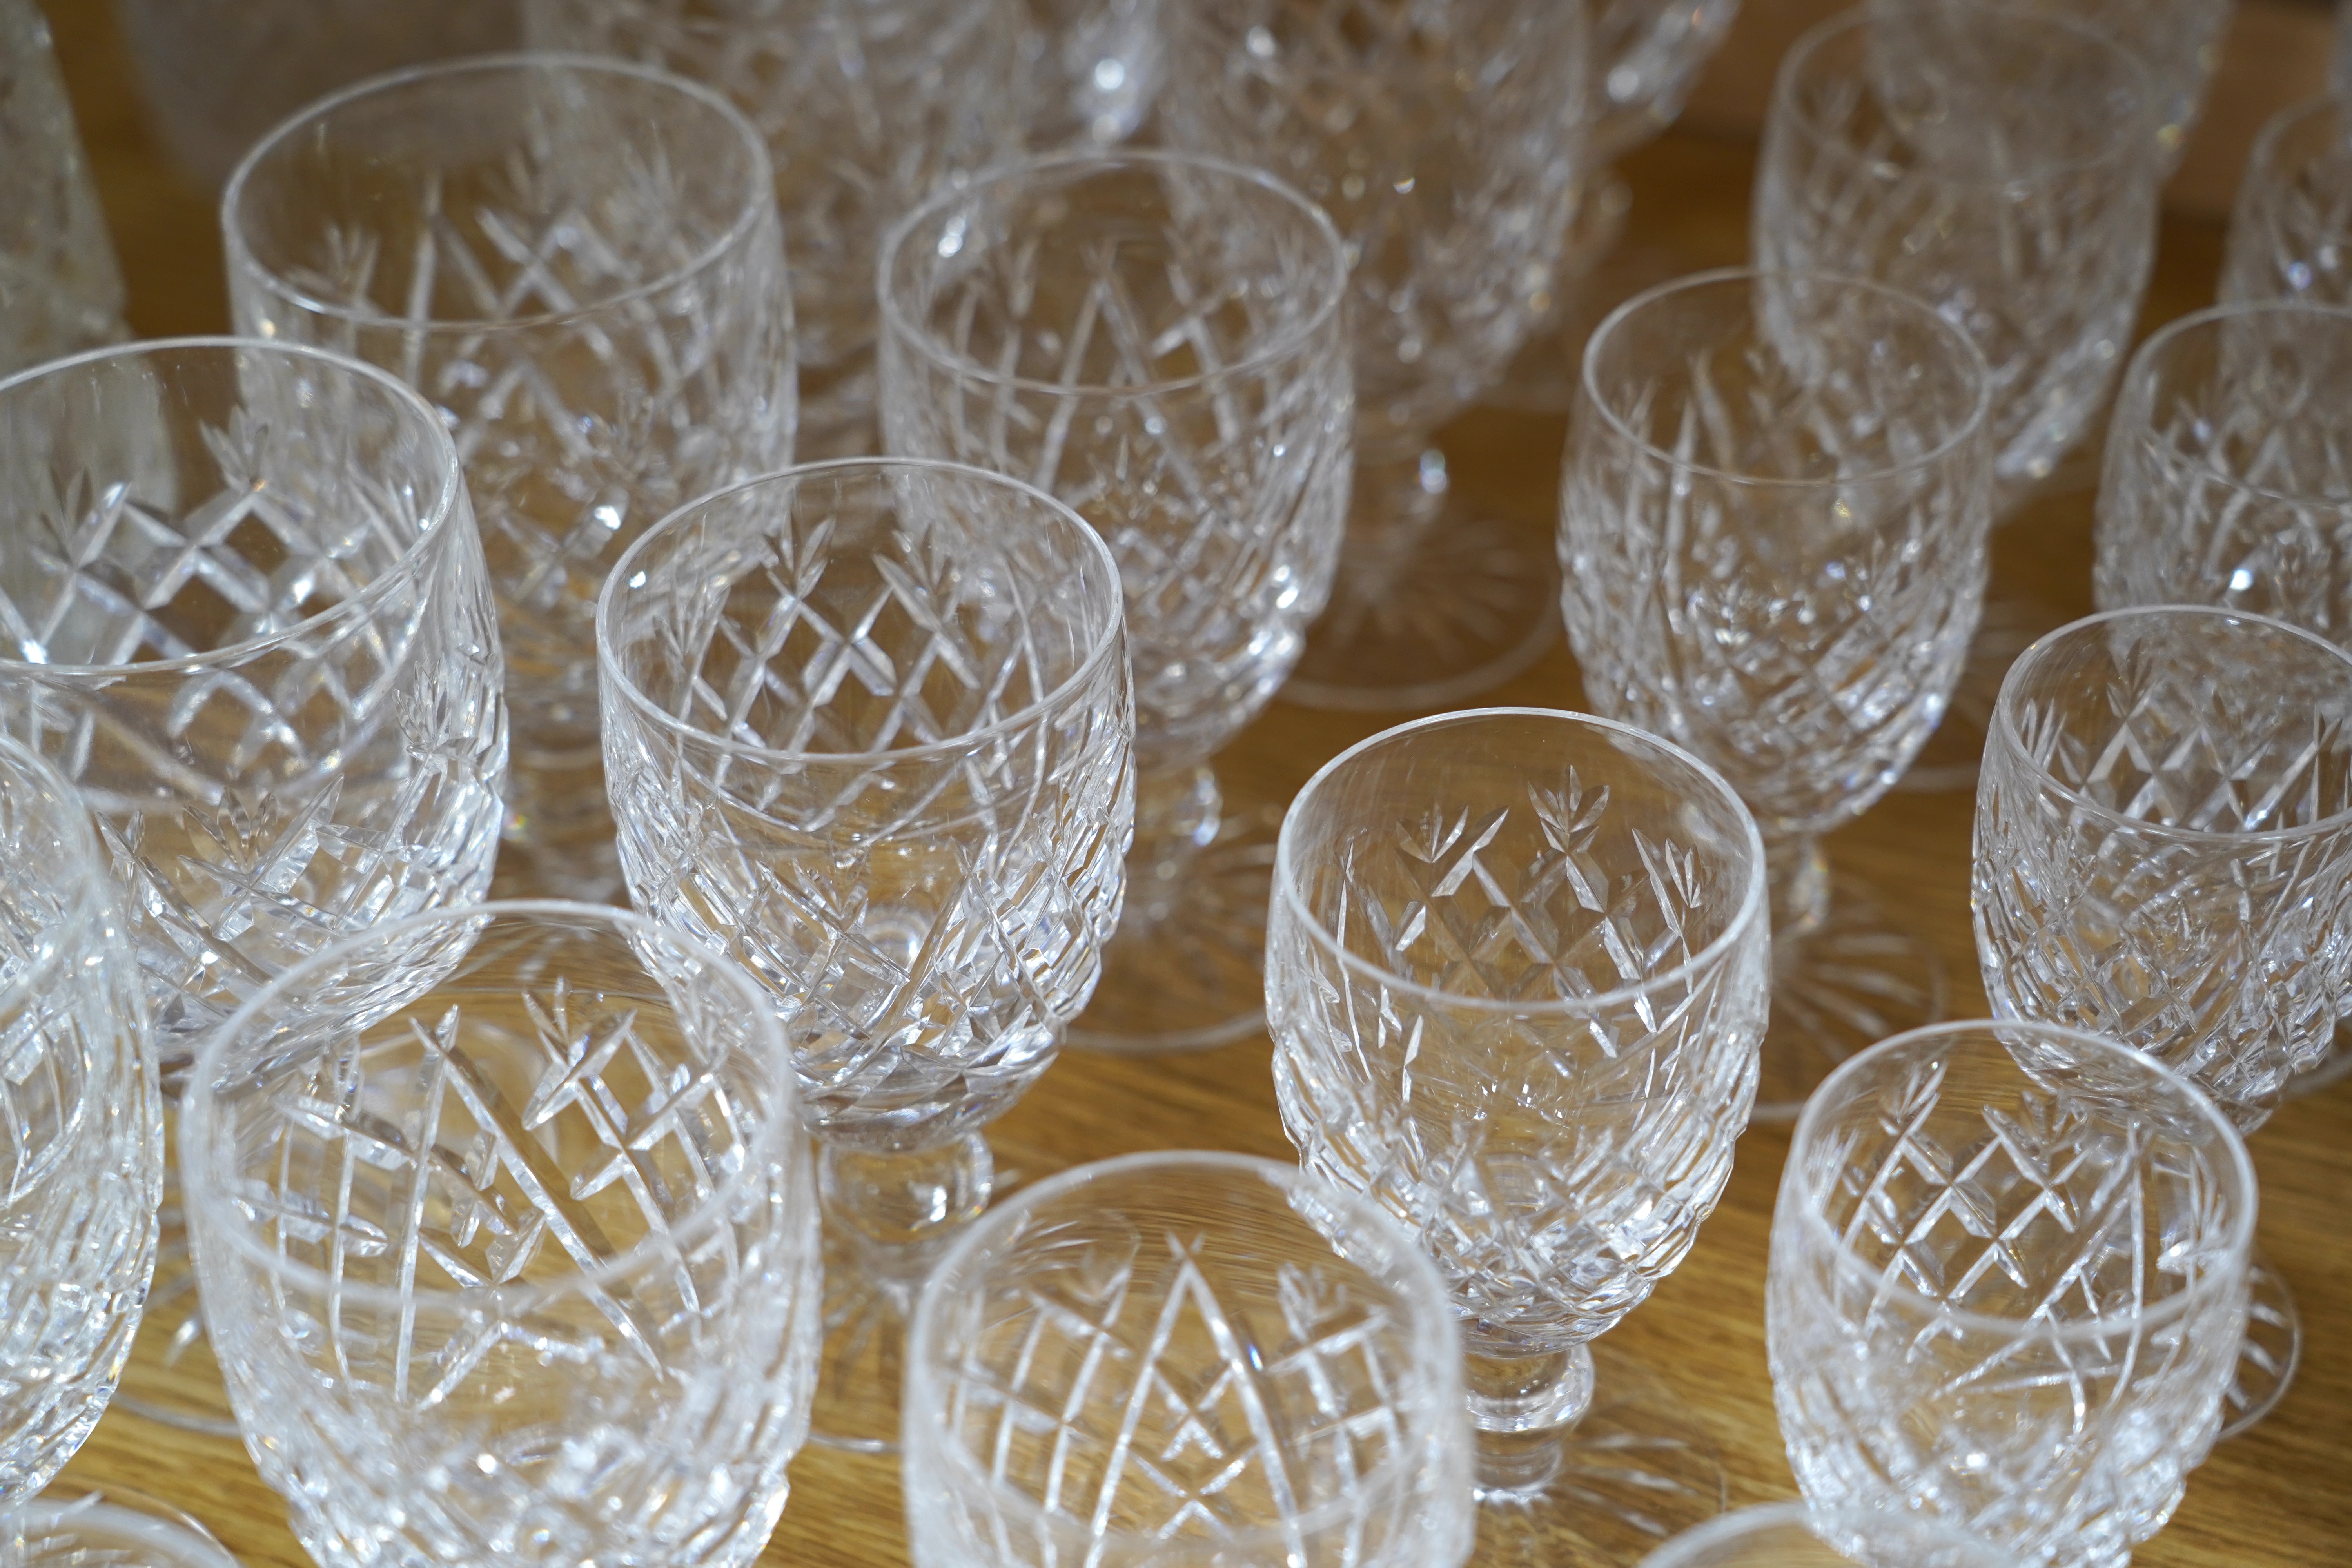 A suite of Waterford drinking glasses in various sizes, including wine glasses, liqueur glasses, champagne glasses, etc. together with glass vases and jugs, etc. (66)